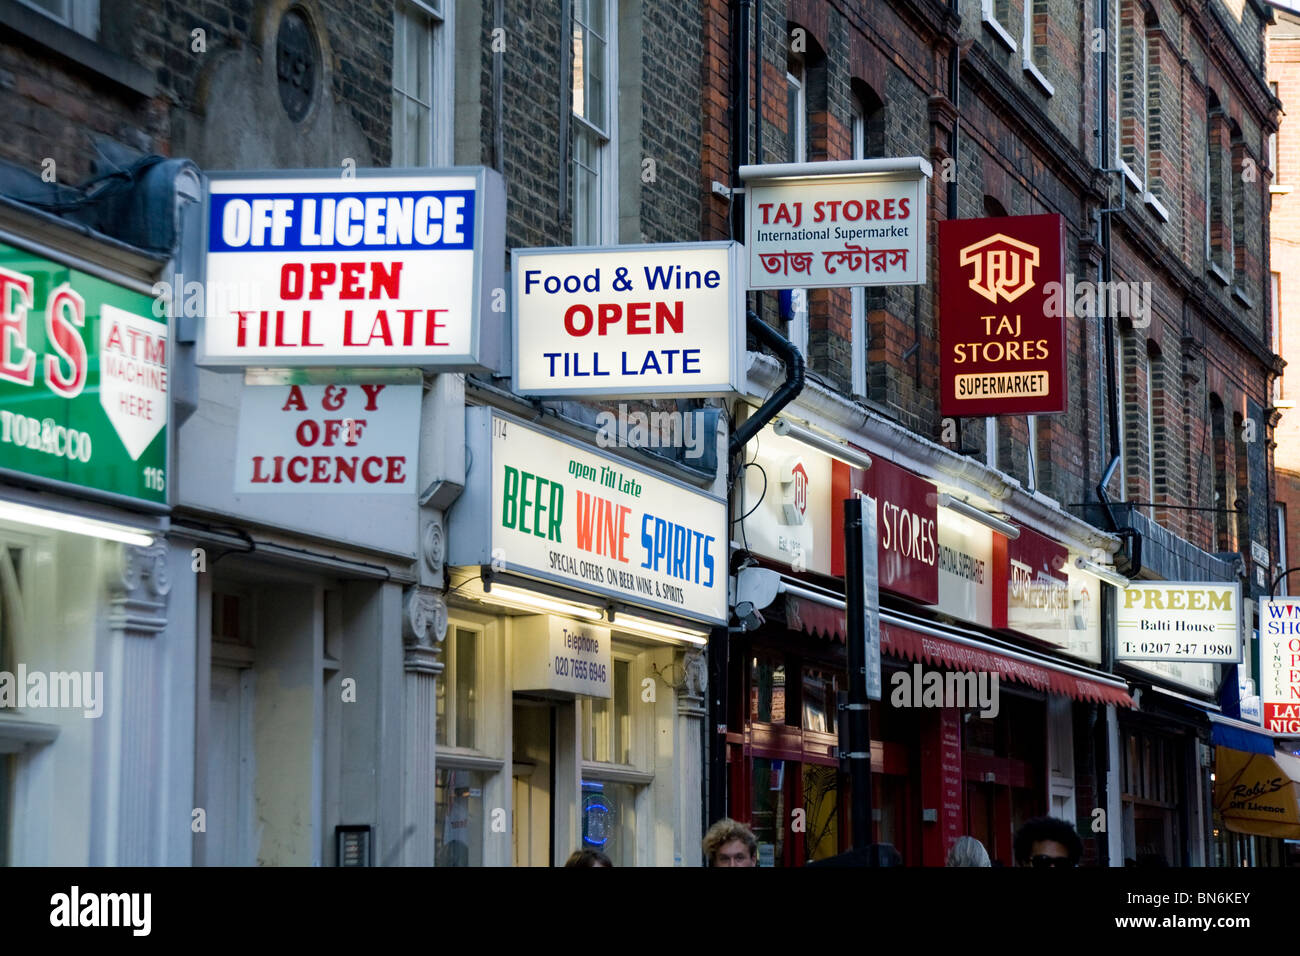 Signs above Indian / Asian stores and shops – businesses – on Brick Lane in East London. UK. Stock Photo